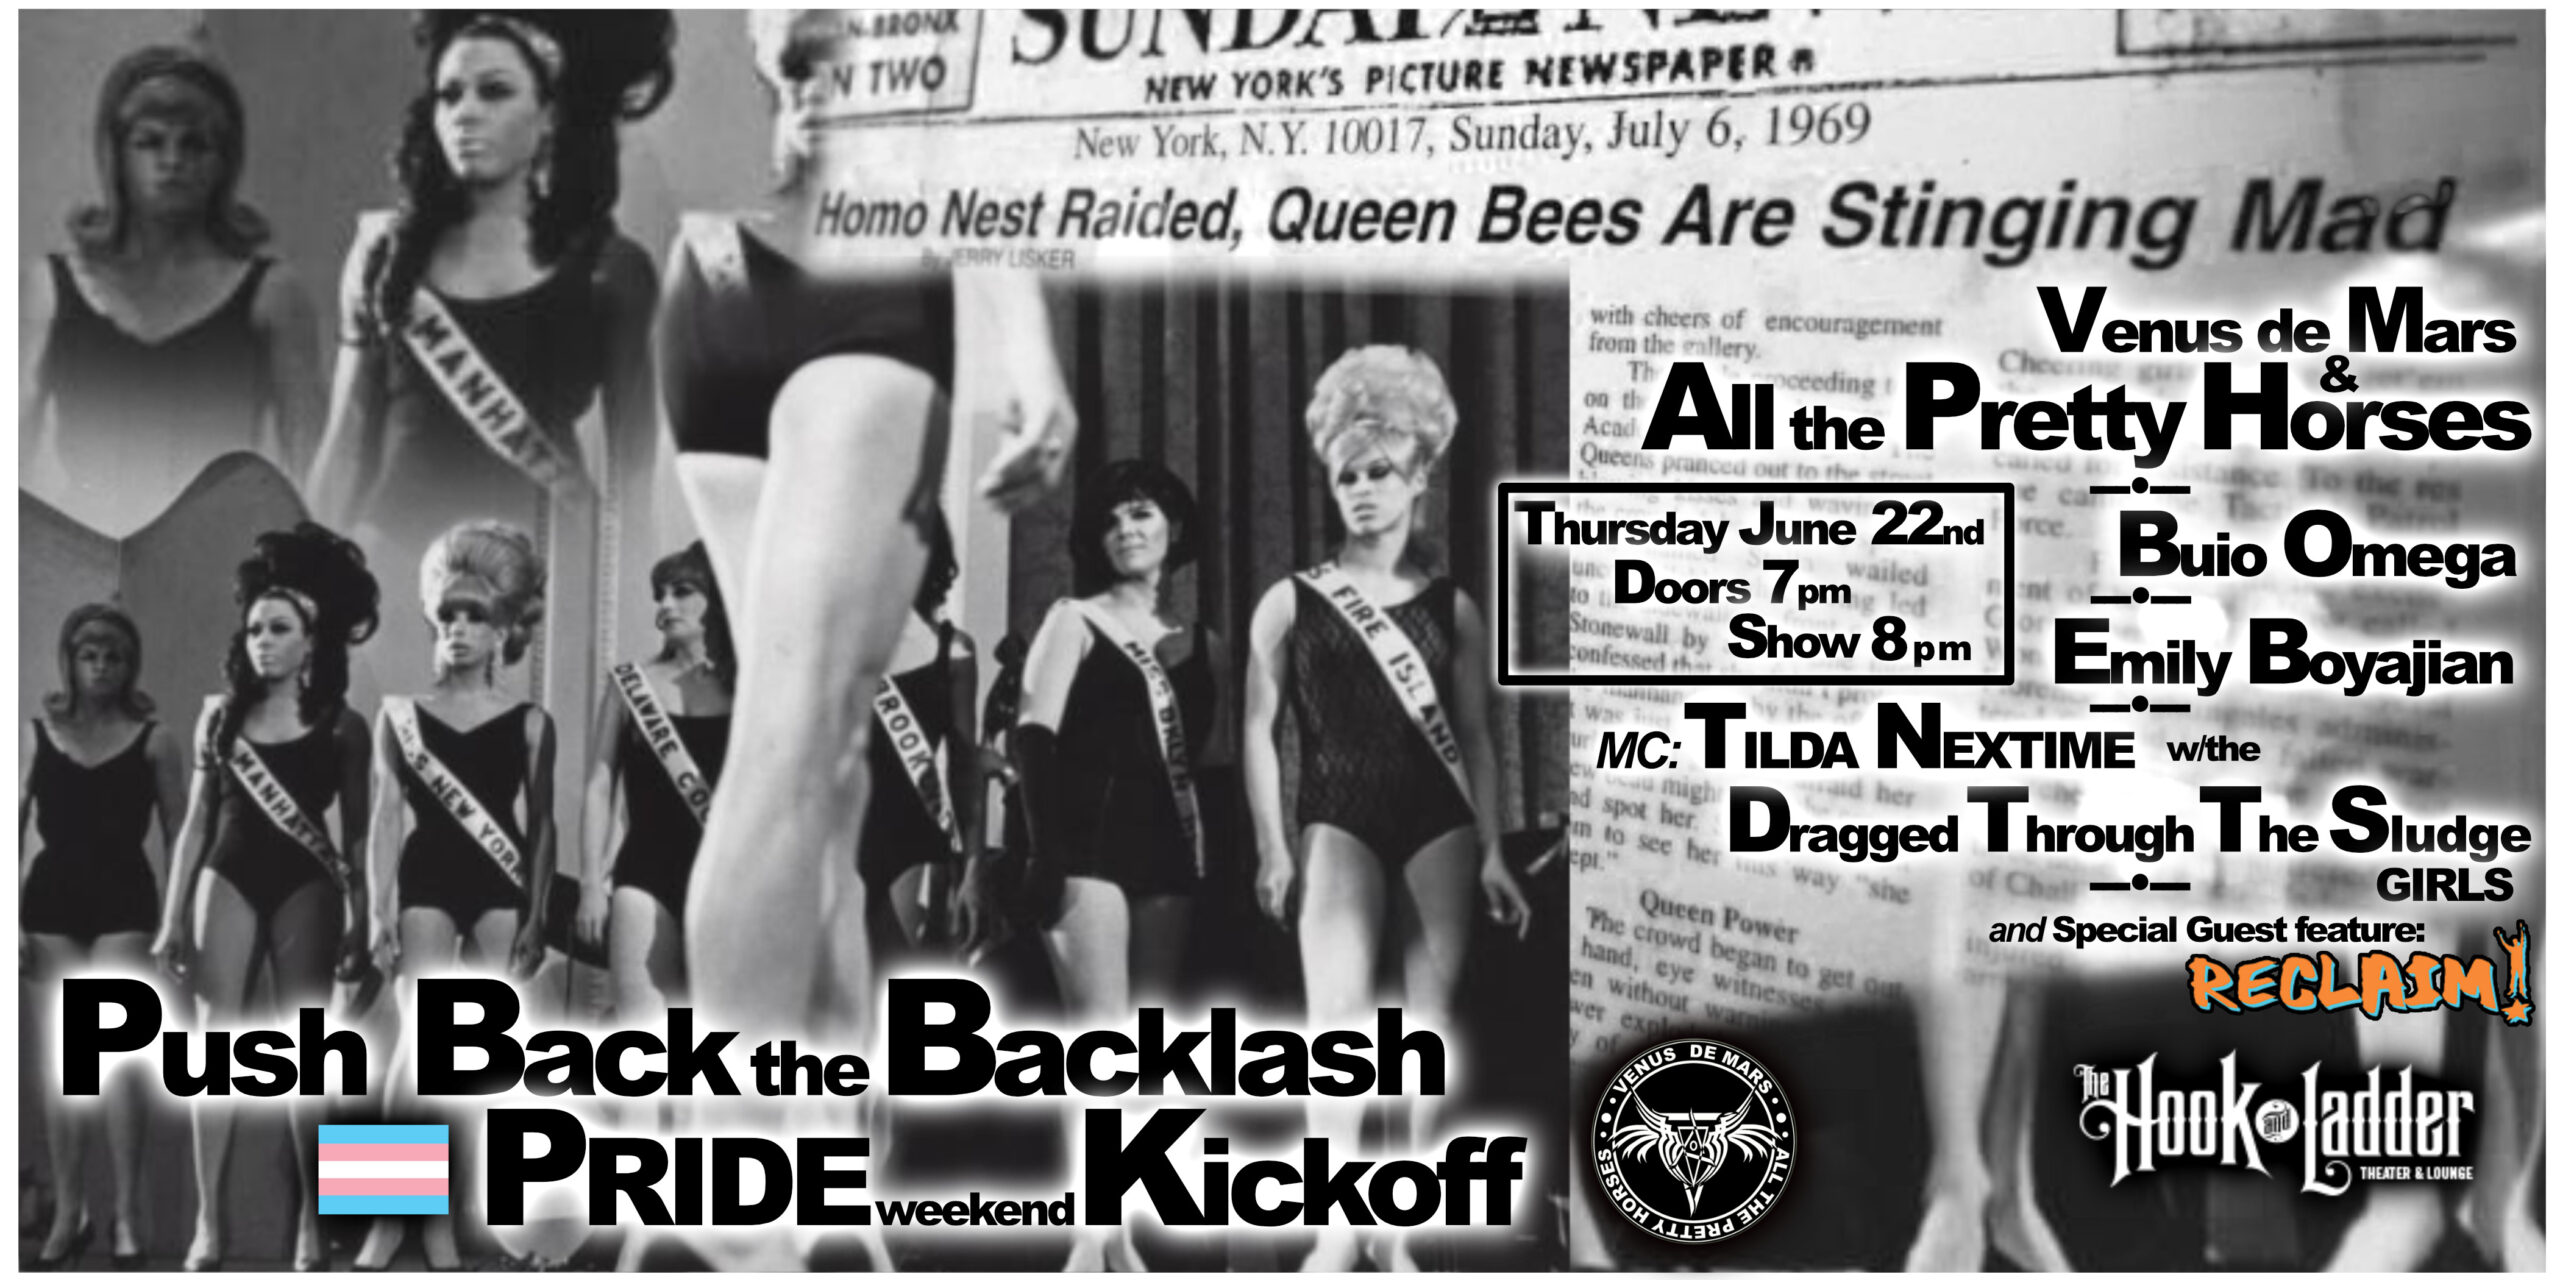 ‘Push Back the Backlash’ with Venus DeMars & ATPH, BUIO OMEGA, Emily Boyajian, & Tilda Nextime & The Dragged Through the Sludge Girls Celebrate Pride at The Hook with an evening of Drag, Dancing, and ROCK presented by RECLAIM! Thursday June 22 The Hook and Ladder Theater Doors 7:00pm :: Music 7:30pm :: 21+ General Admission*: $15 ADV / $25 DOS *Does not include fees NO REFUNDS